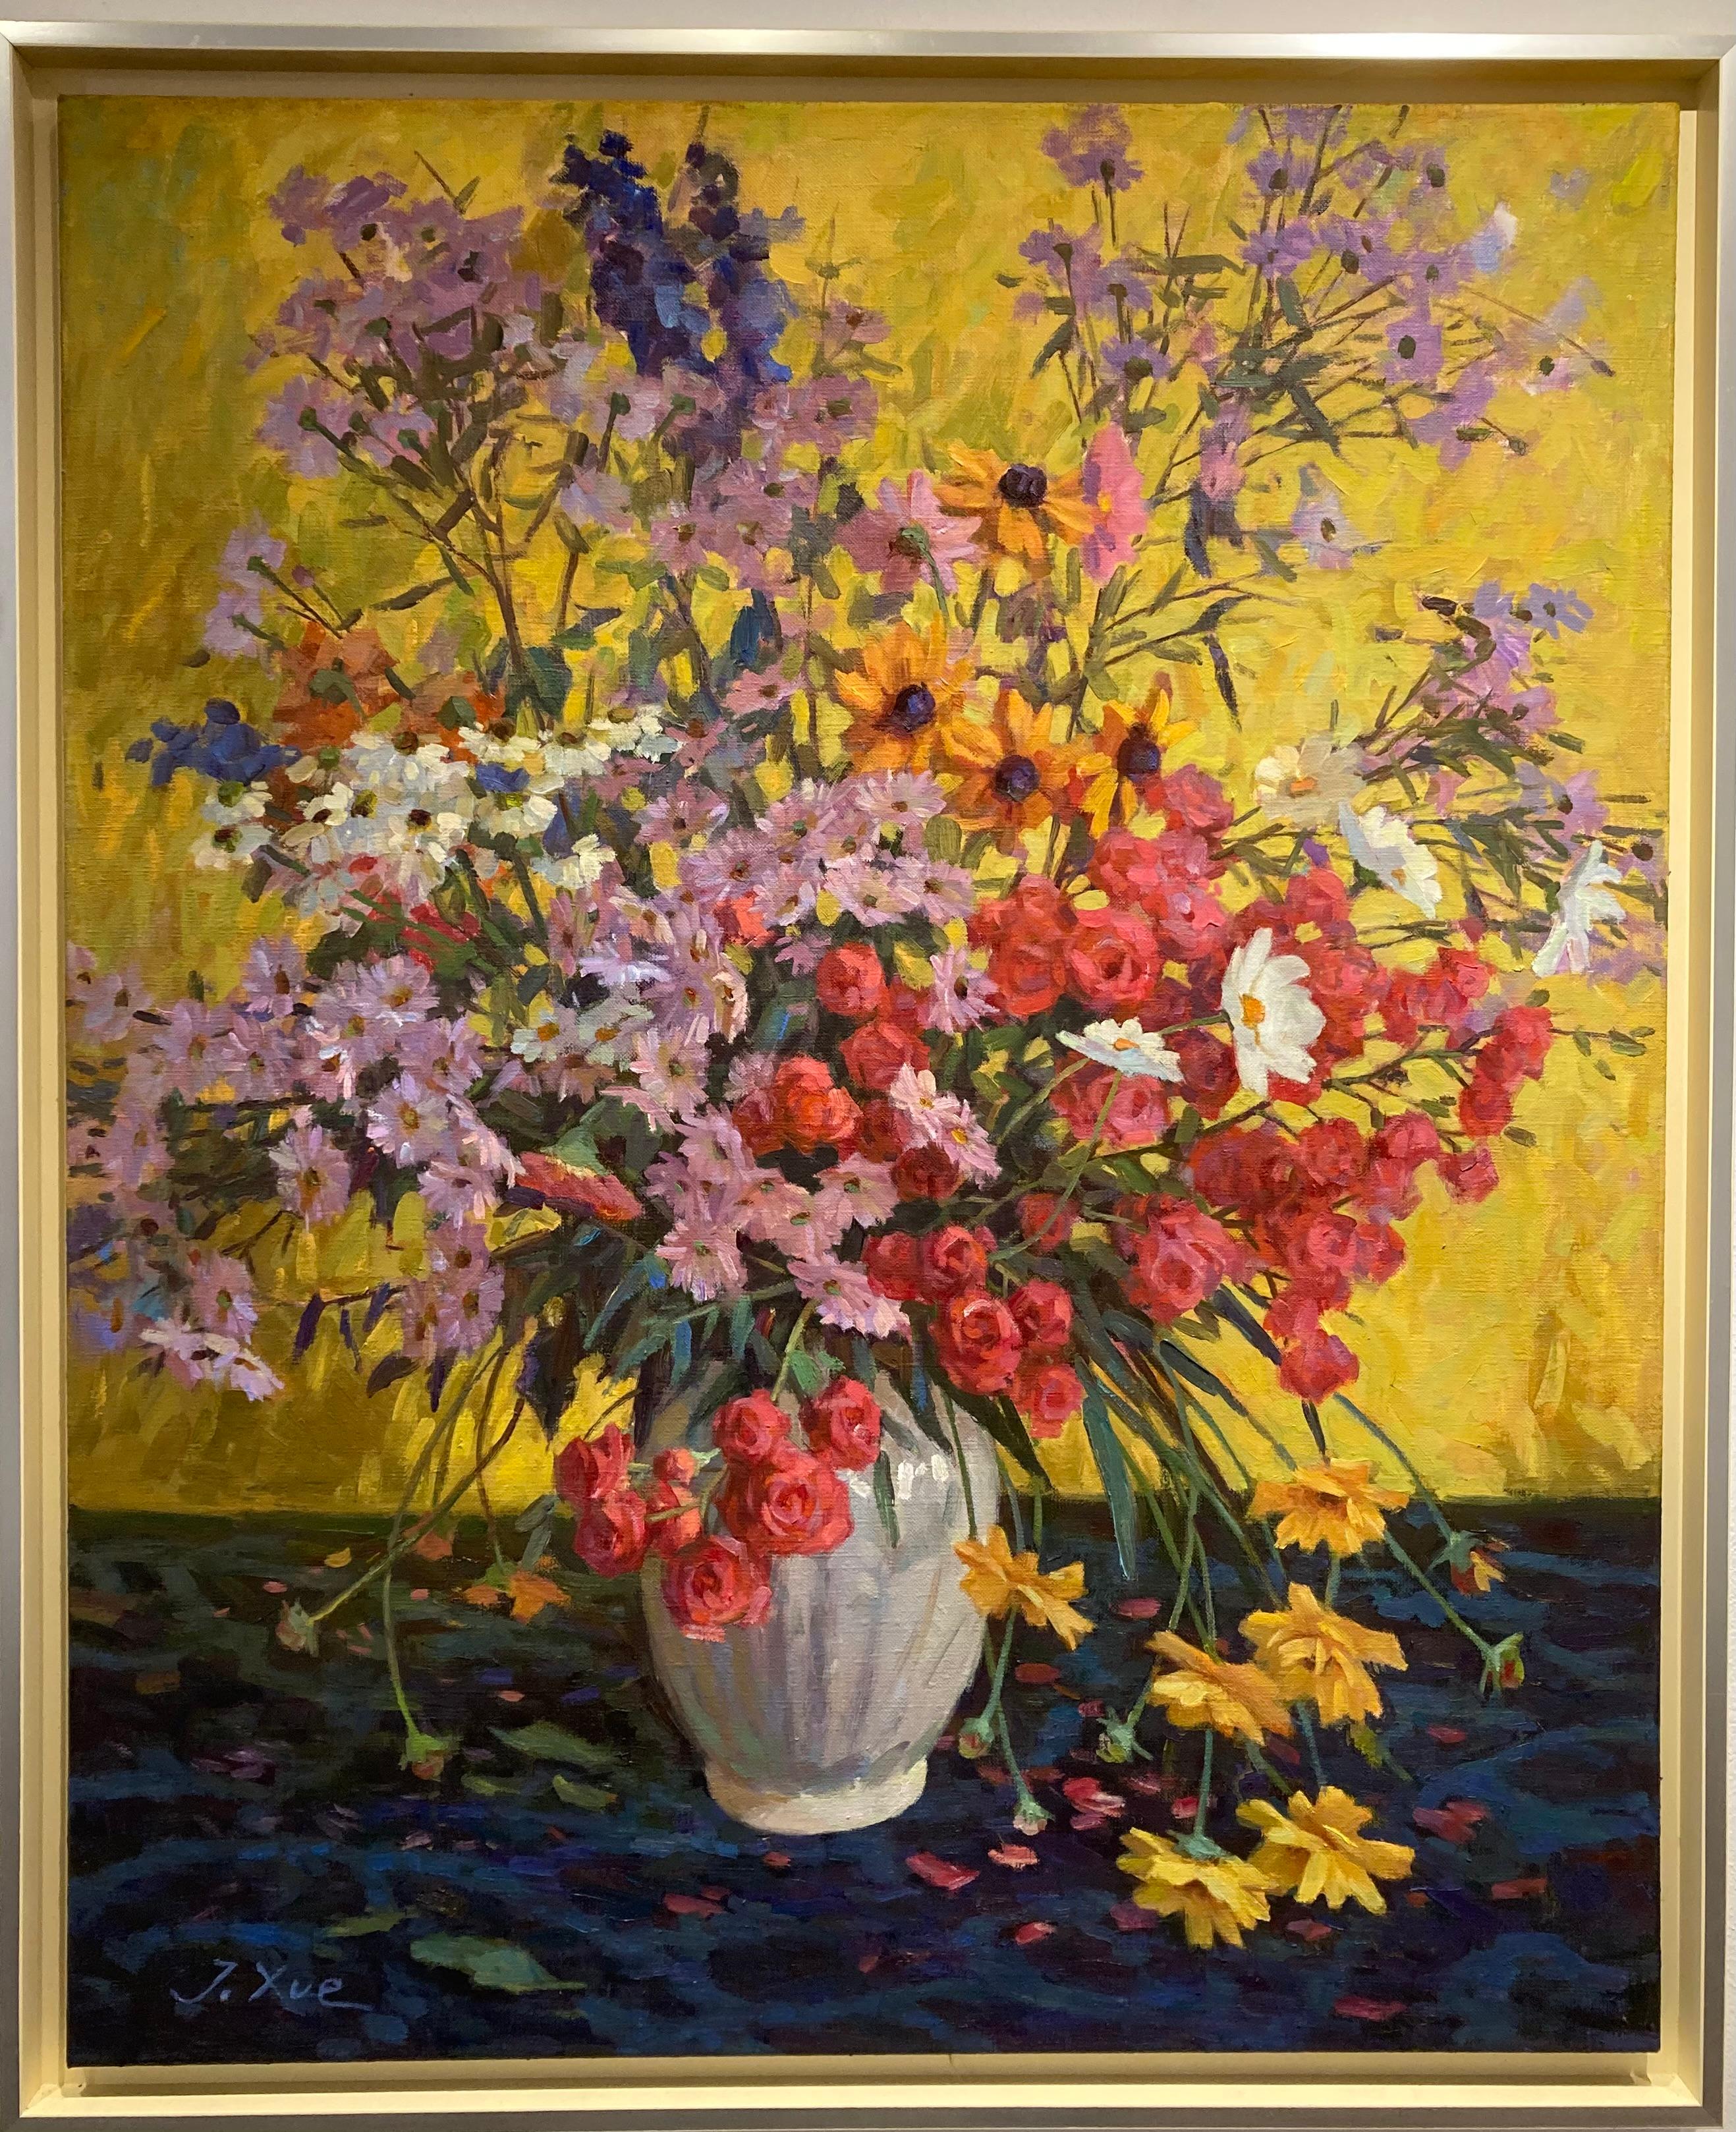 Juane Xue Figurative Painting - Autumn Bouquet Oil Painting on Canvas Flowers Colors In Stock